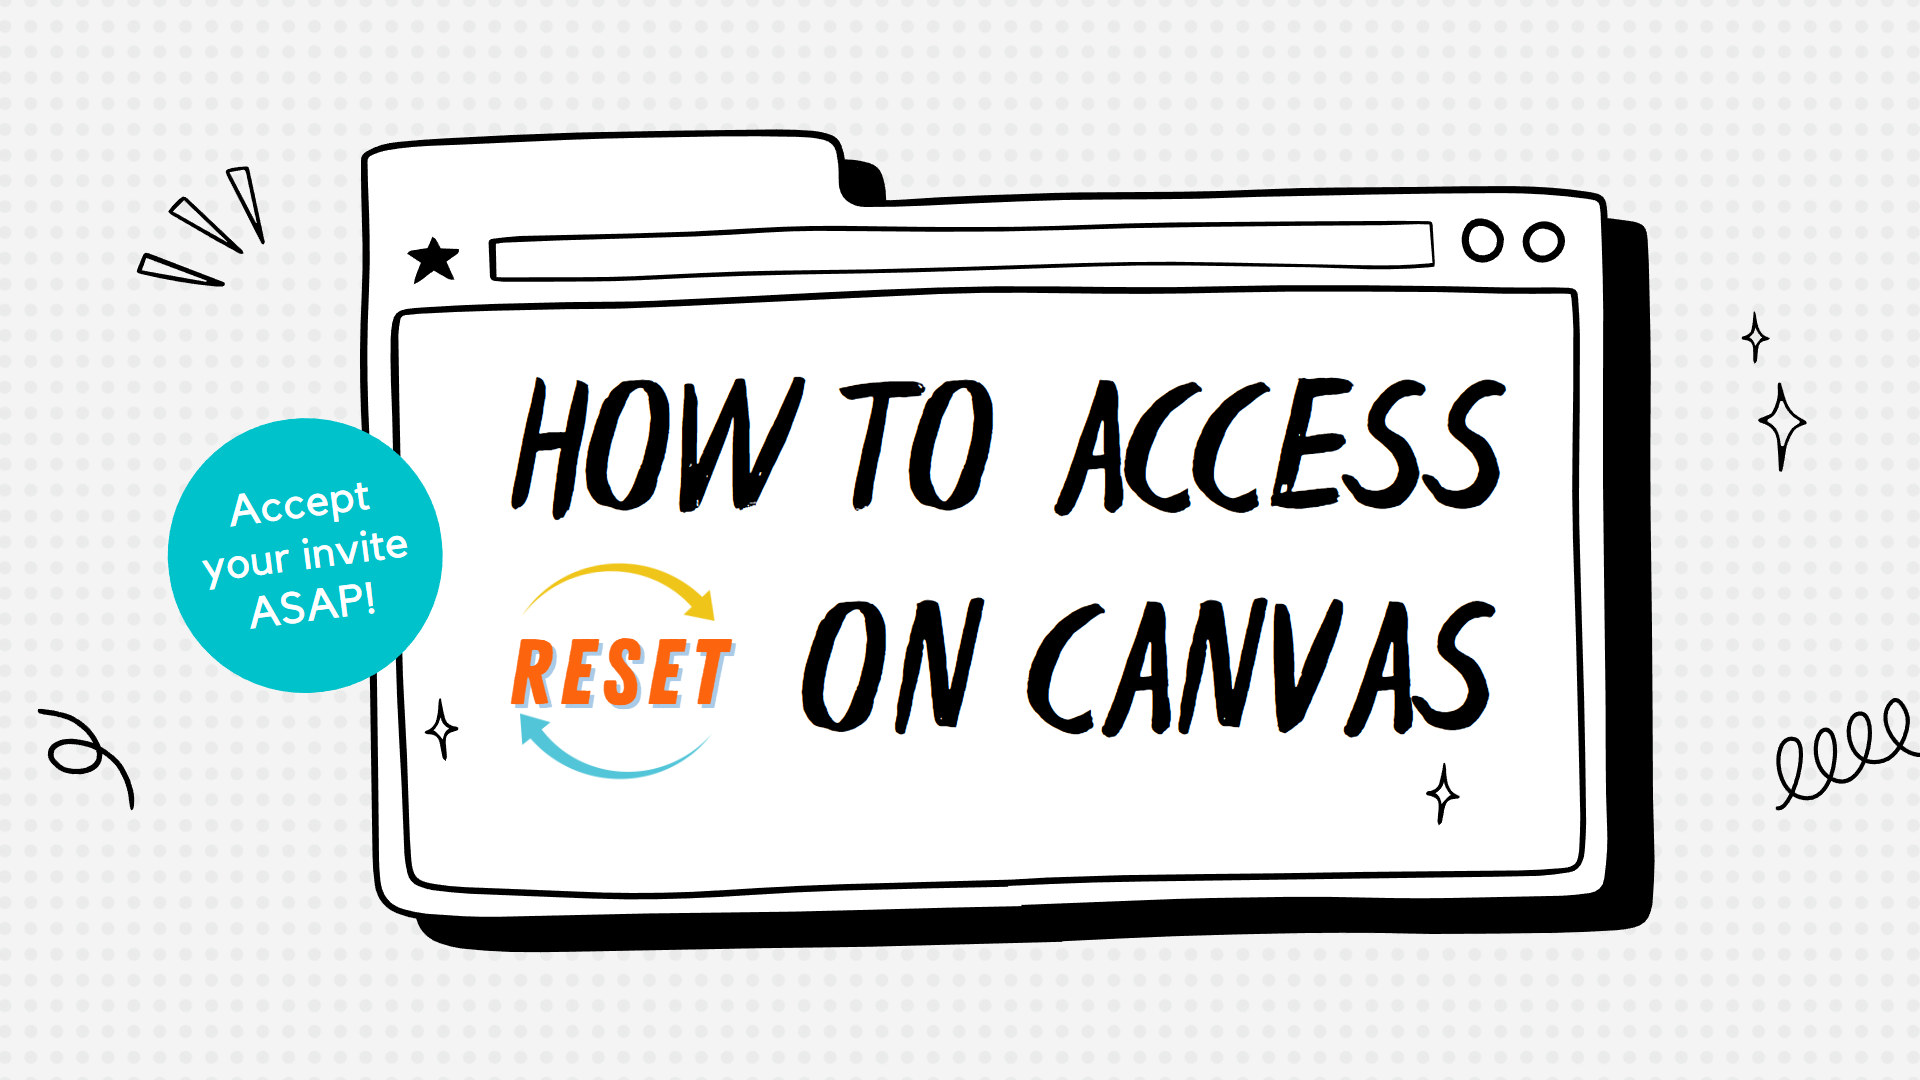 Accessing CANVAS VIDEO with VOICE RESET Instructions